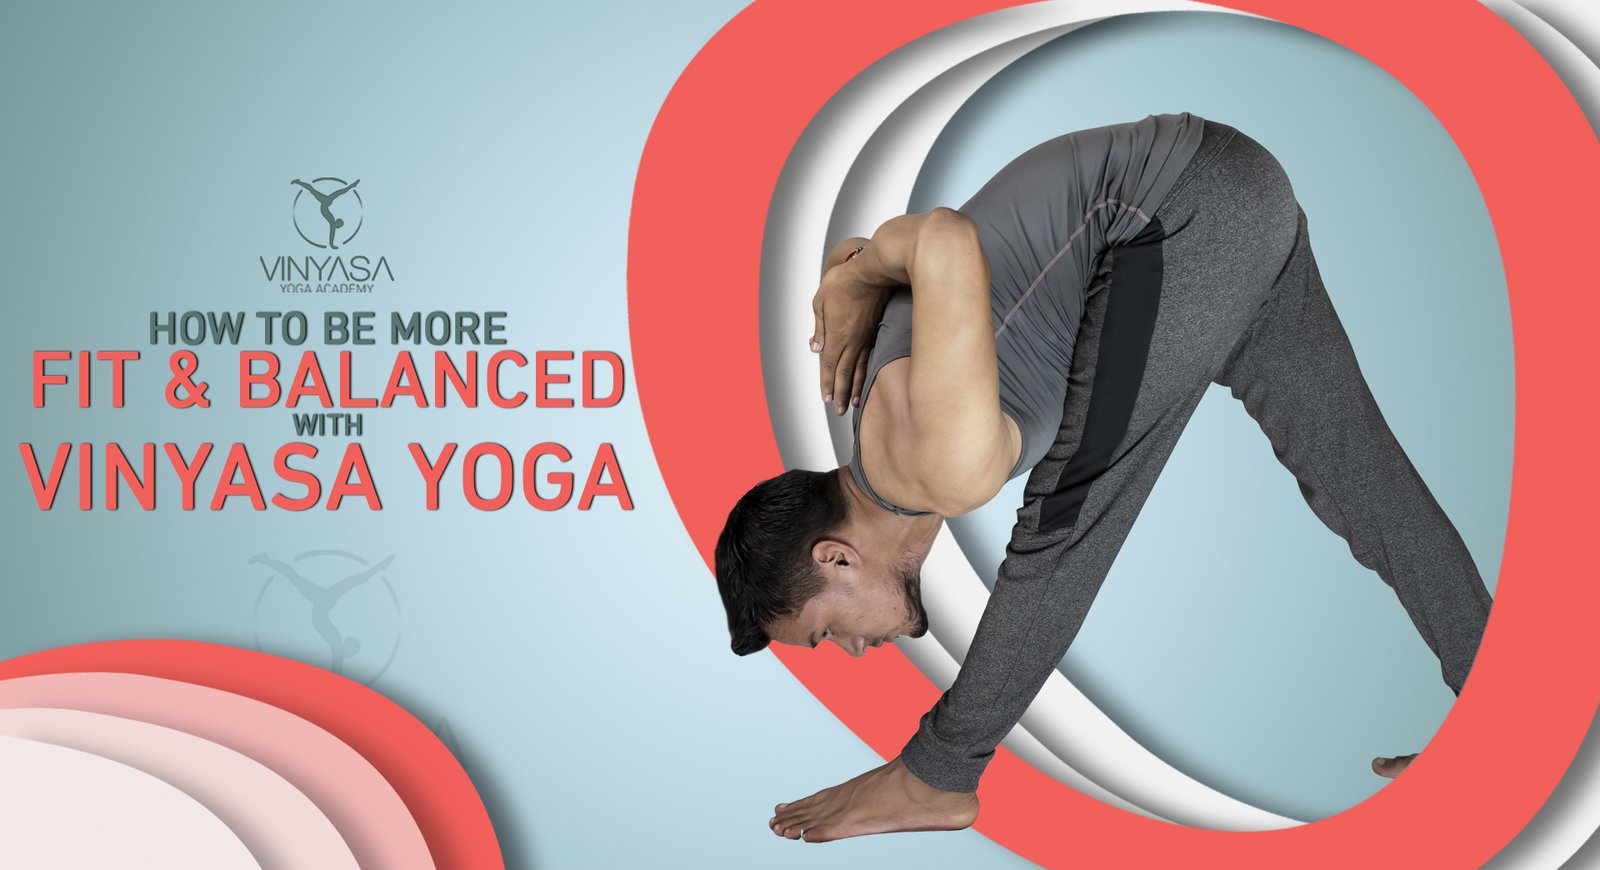 What Is Vinyasa Yoga and What Is It Good For?